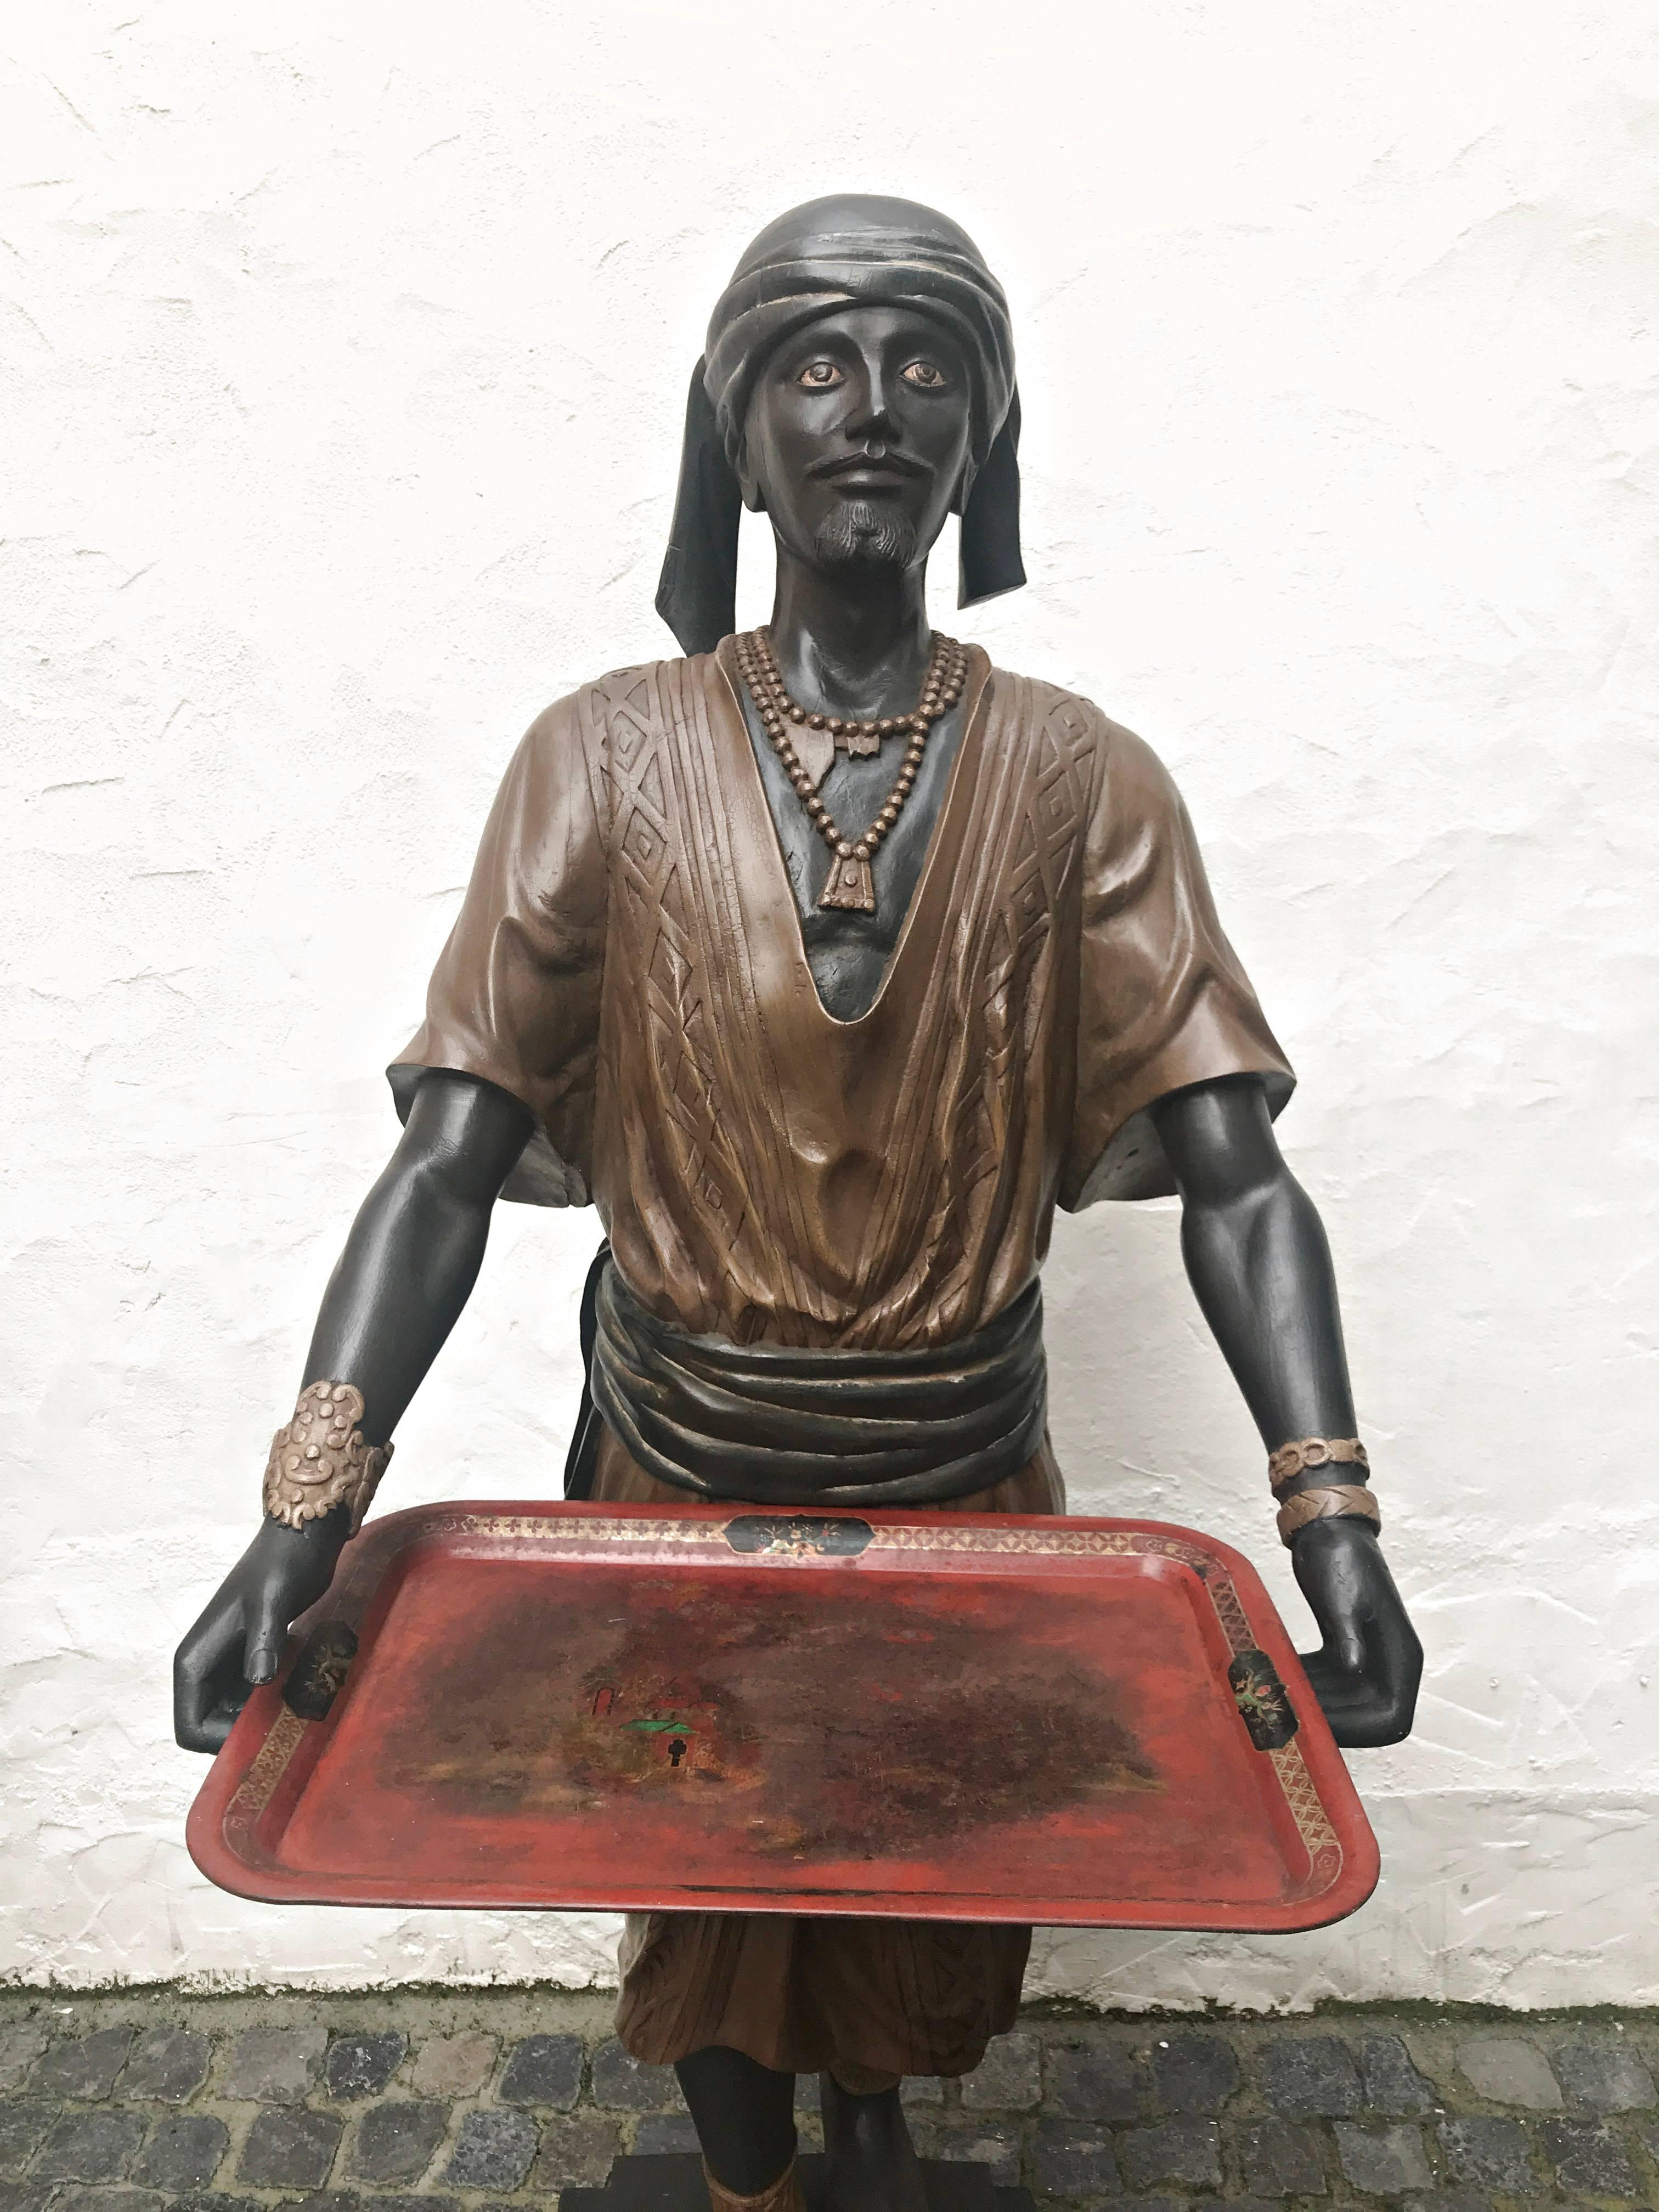 Rare, big and heavy, 114 lbs (52 kg.) wooden advertising sculpture.
The sculpture was carved and polychrome decorated circa 1890 and comes from a old German colonial country store.
The one carries a Chinese tray. The condition of the sculpture is